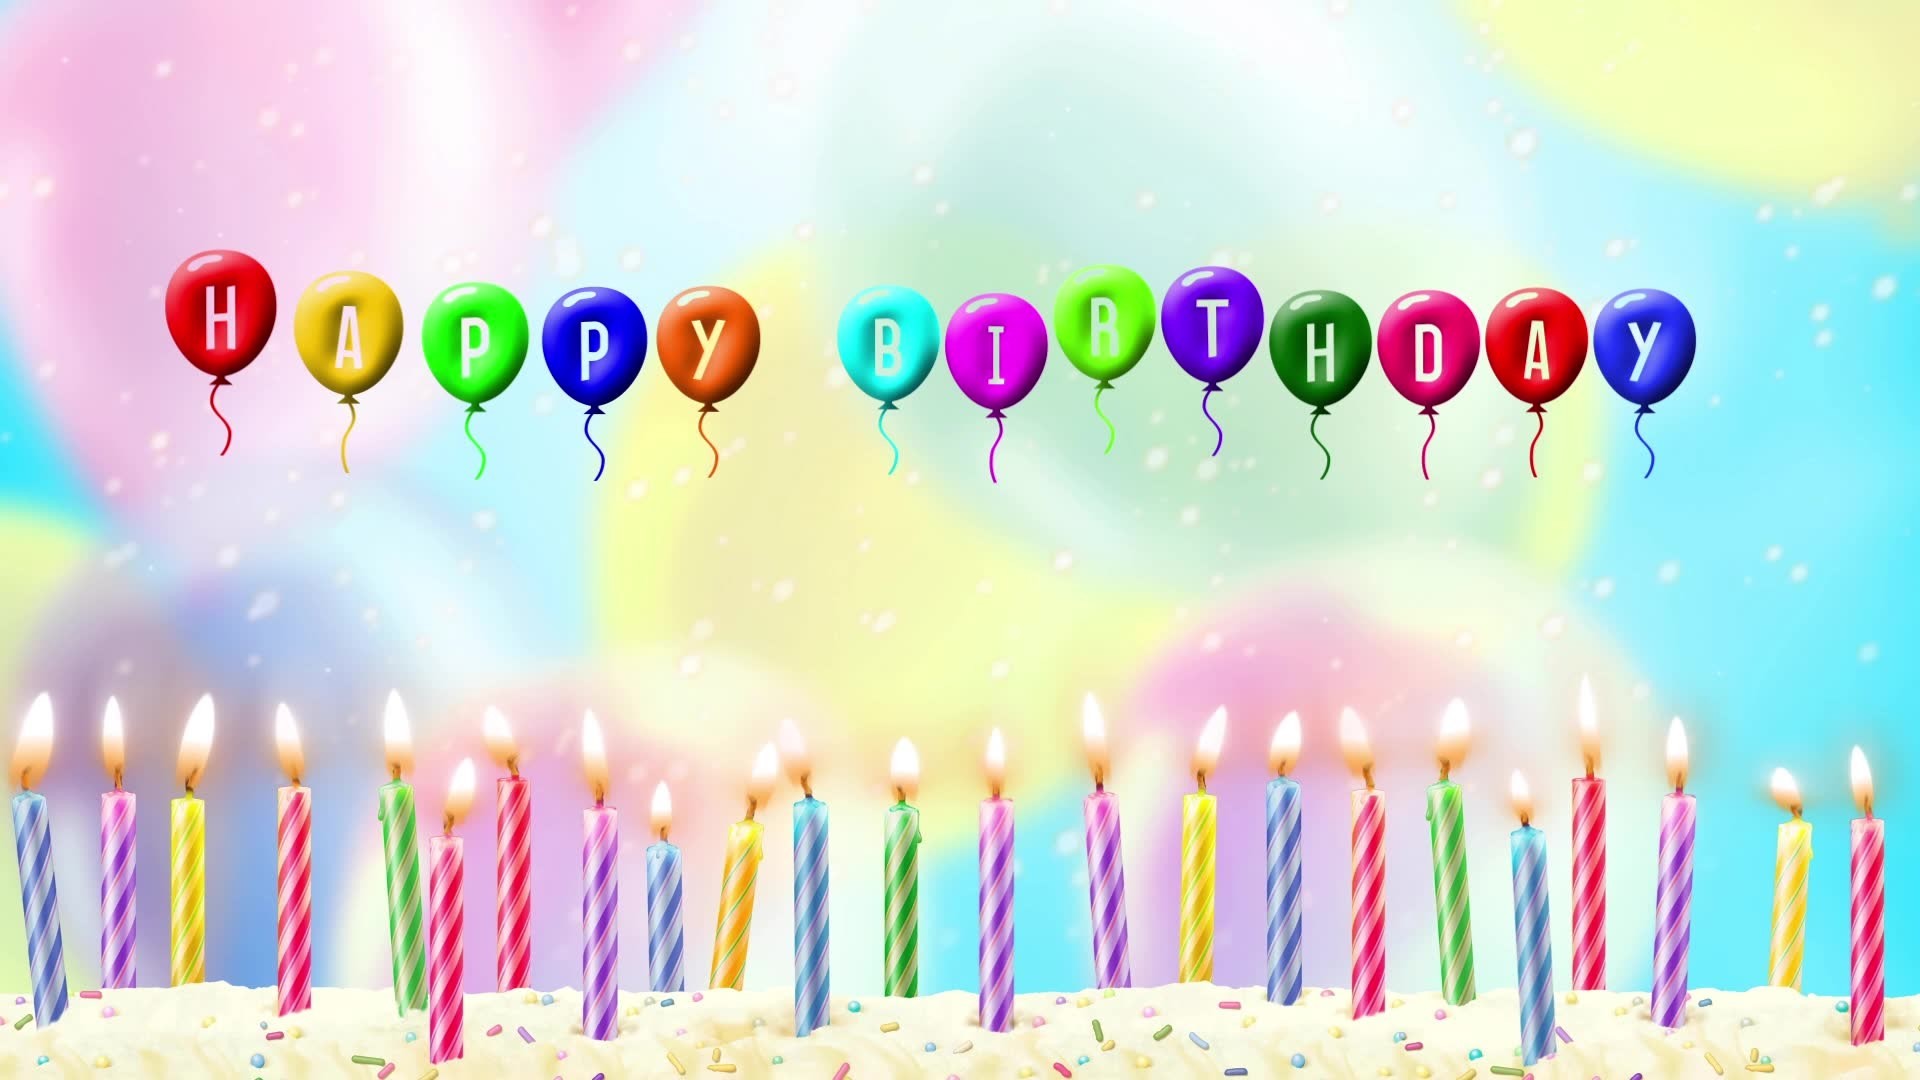 Happy Birthday Wallpapers Hd Images Live Hd Wallpaper - Happy Birthday Background Hd - HD Wallpaper 